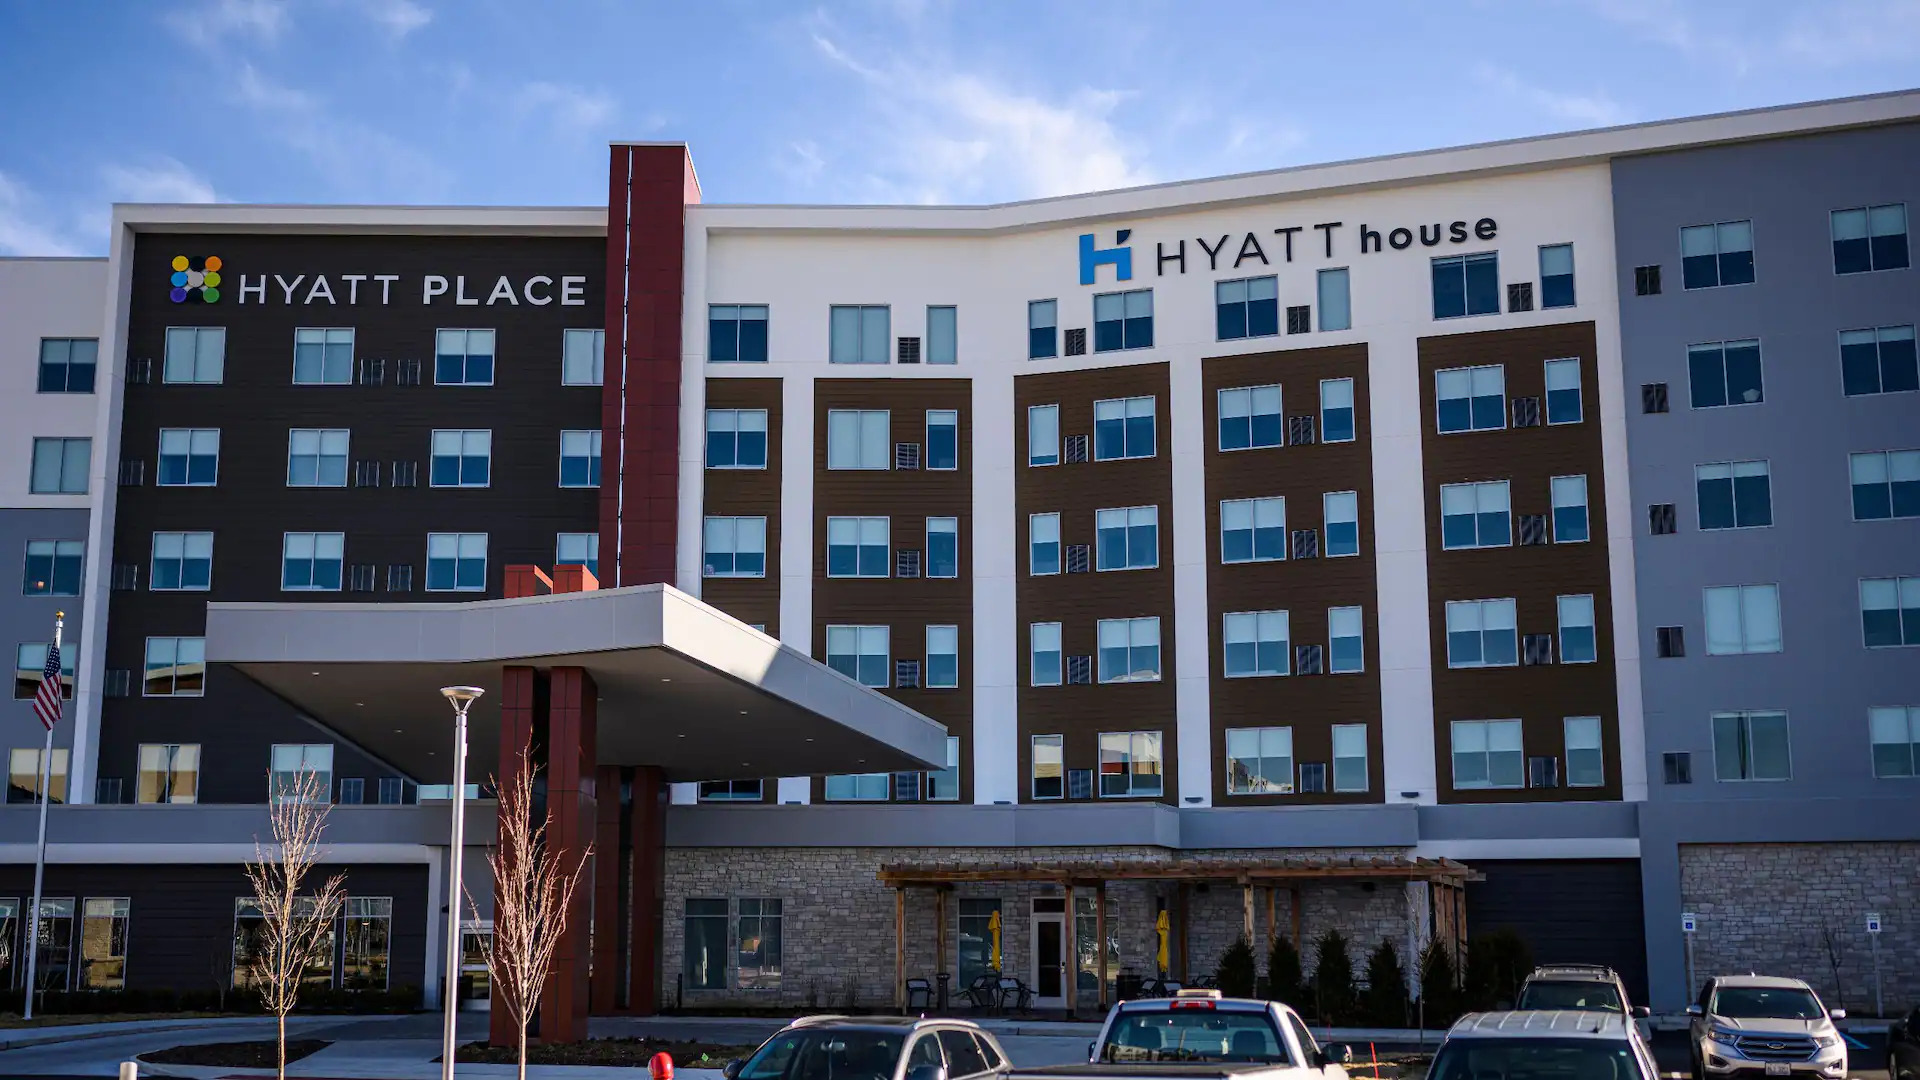 Photo of Hyatt Place / Hyatt House Indianapolis / Fishers, Fishers, IN